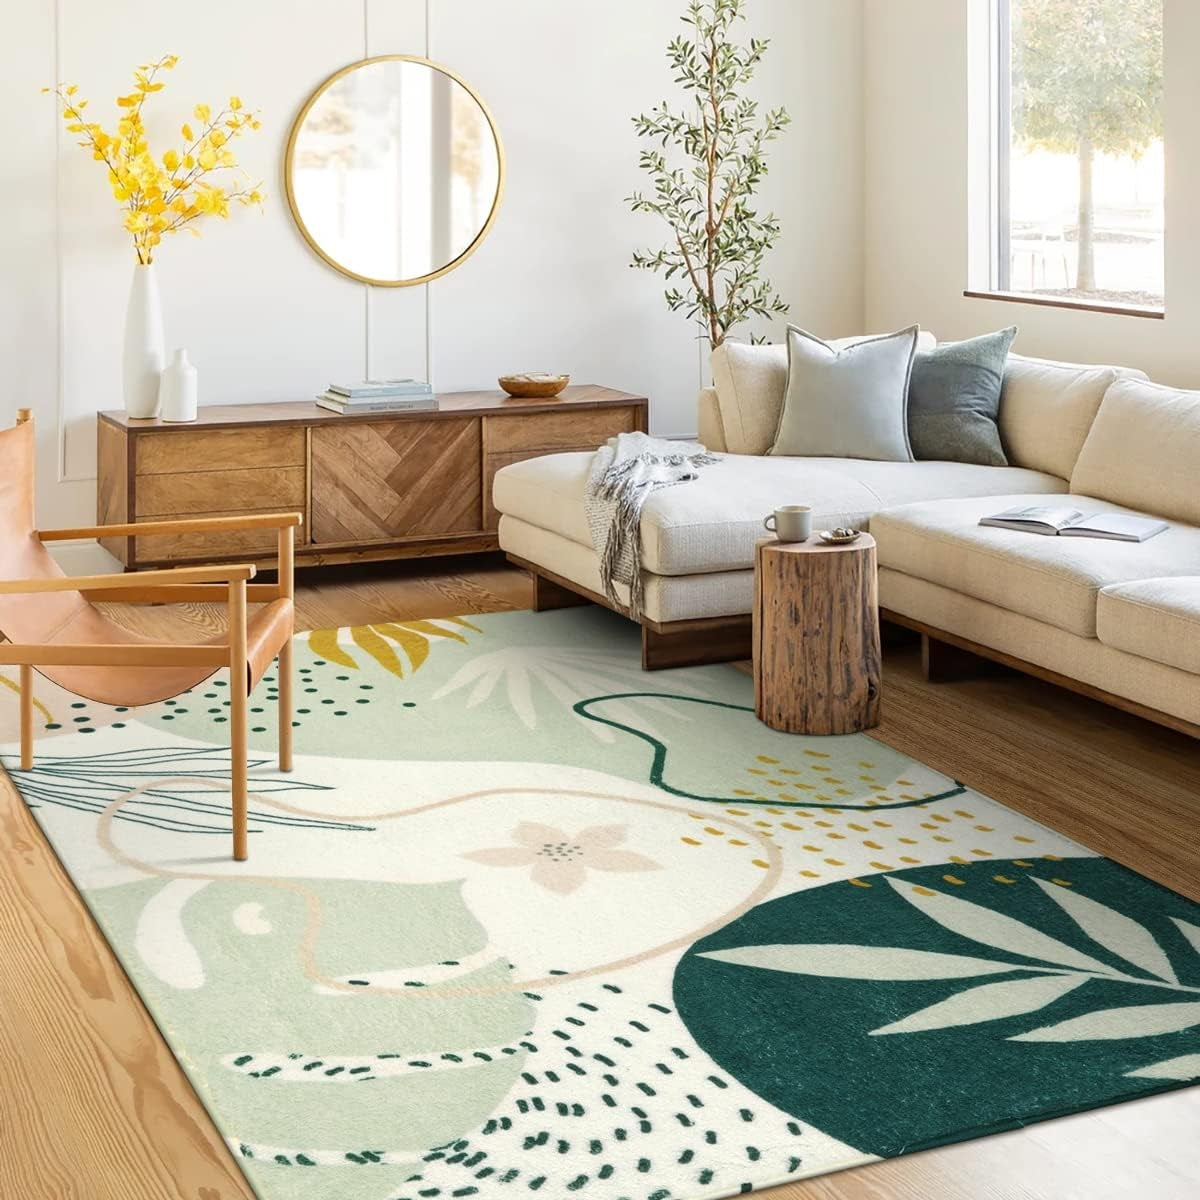  Lahome Sage Green Washable Entryway Rugs Indoors, Botanical  Indoor Outdoor Carpets Front Floral Door Kitchen Rug with Rubber Backing, Low  Profile Non Skid Waterproof Rug for Bedroom, 2x3 : Home 